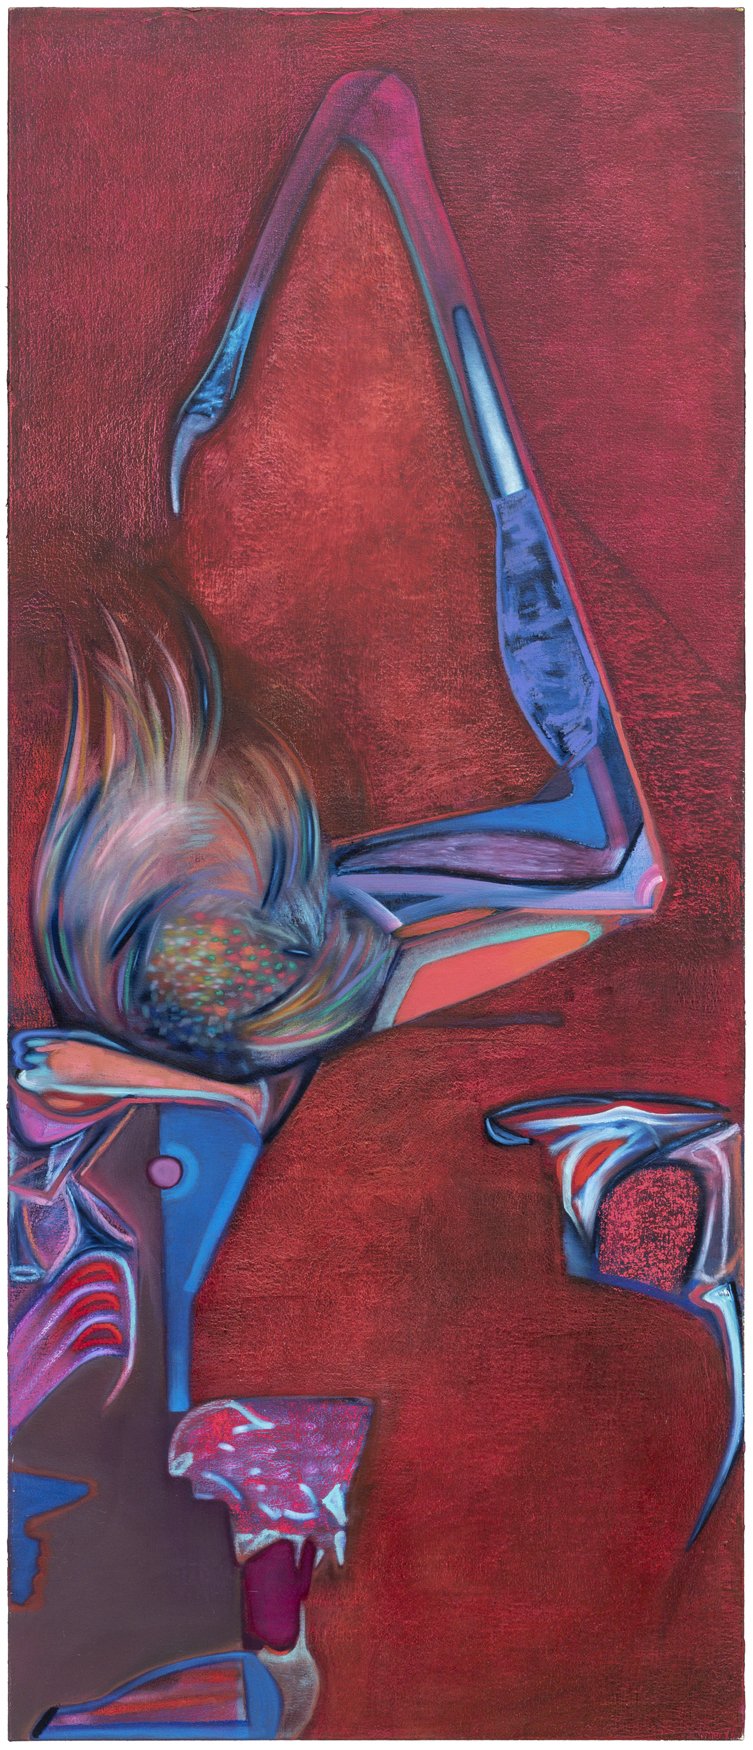  Kevin Tobin,  Blue Bat,  2021. Oil on canvas stretched over hollow core door. 80 x 34 inches. 